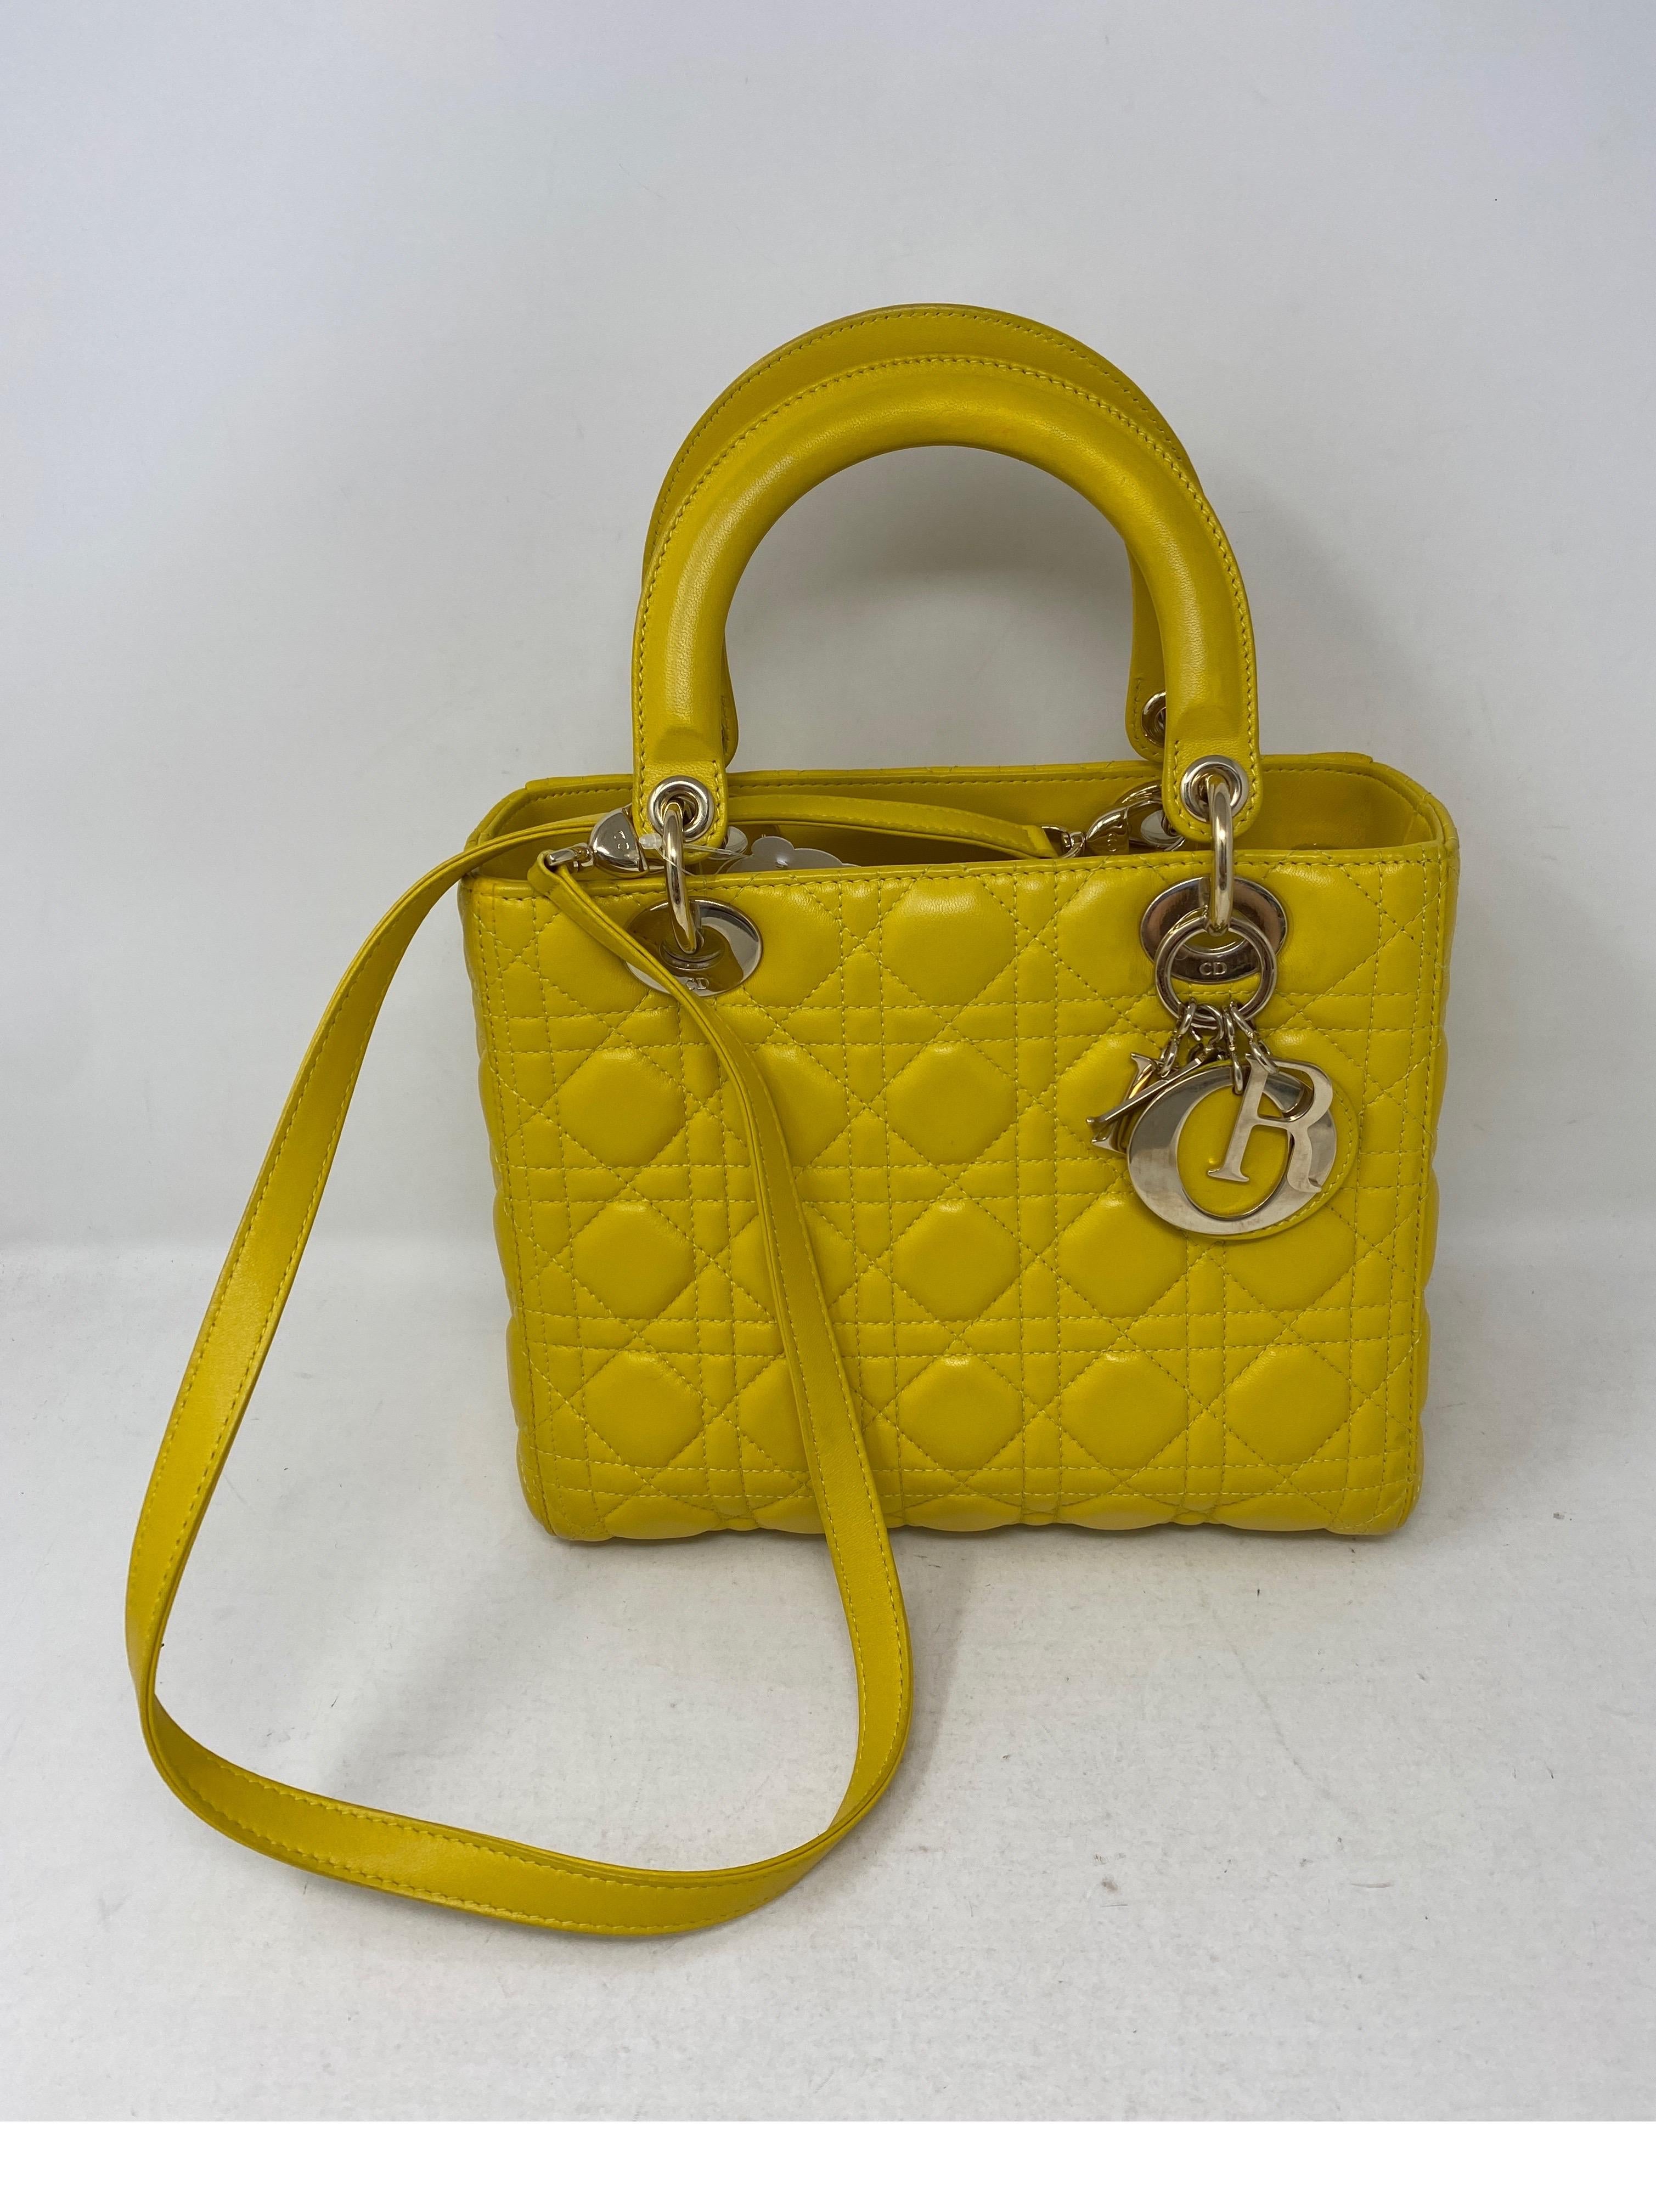 Christian Dior Lady Dior Yellow Bag. Small size Lady bag. Good condition. Bright canary yellow color. Silver hardware. Most wanted size and style by Dior. Guaranteed authentic. 